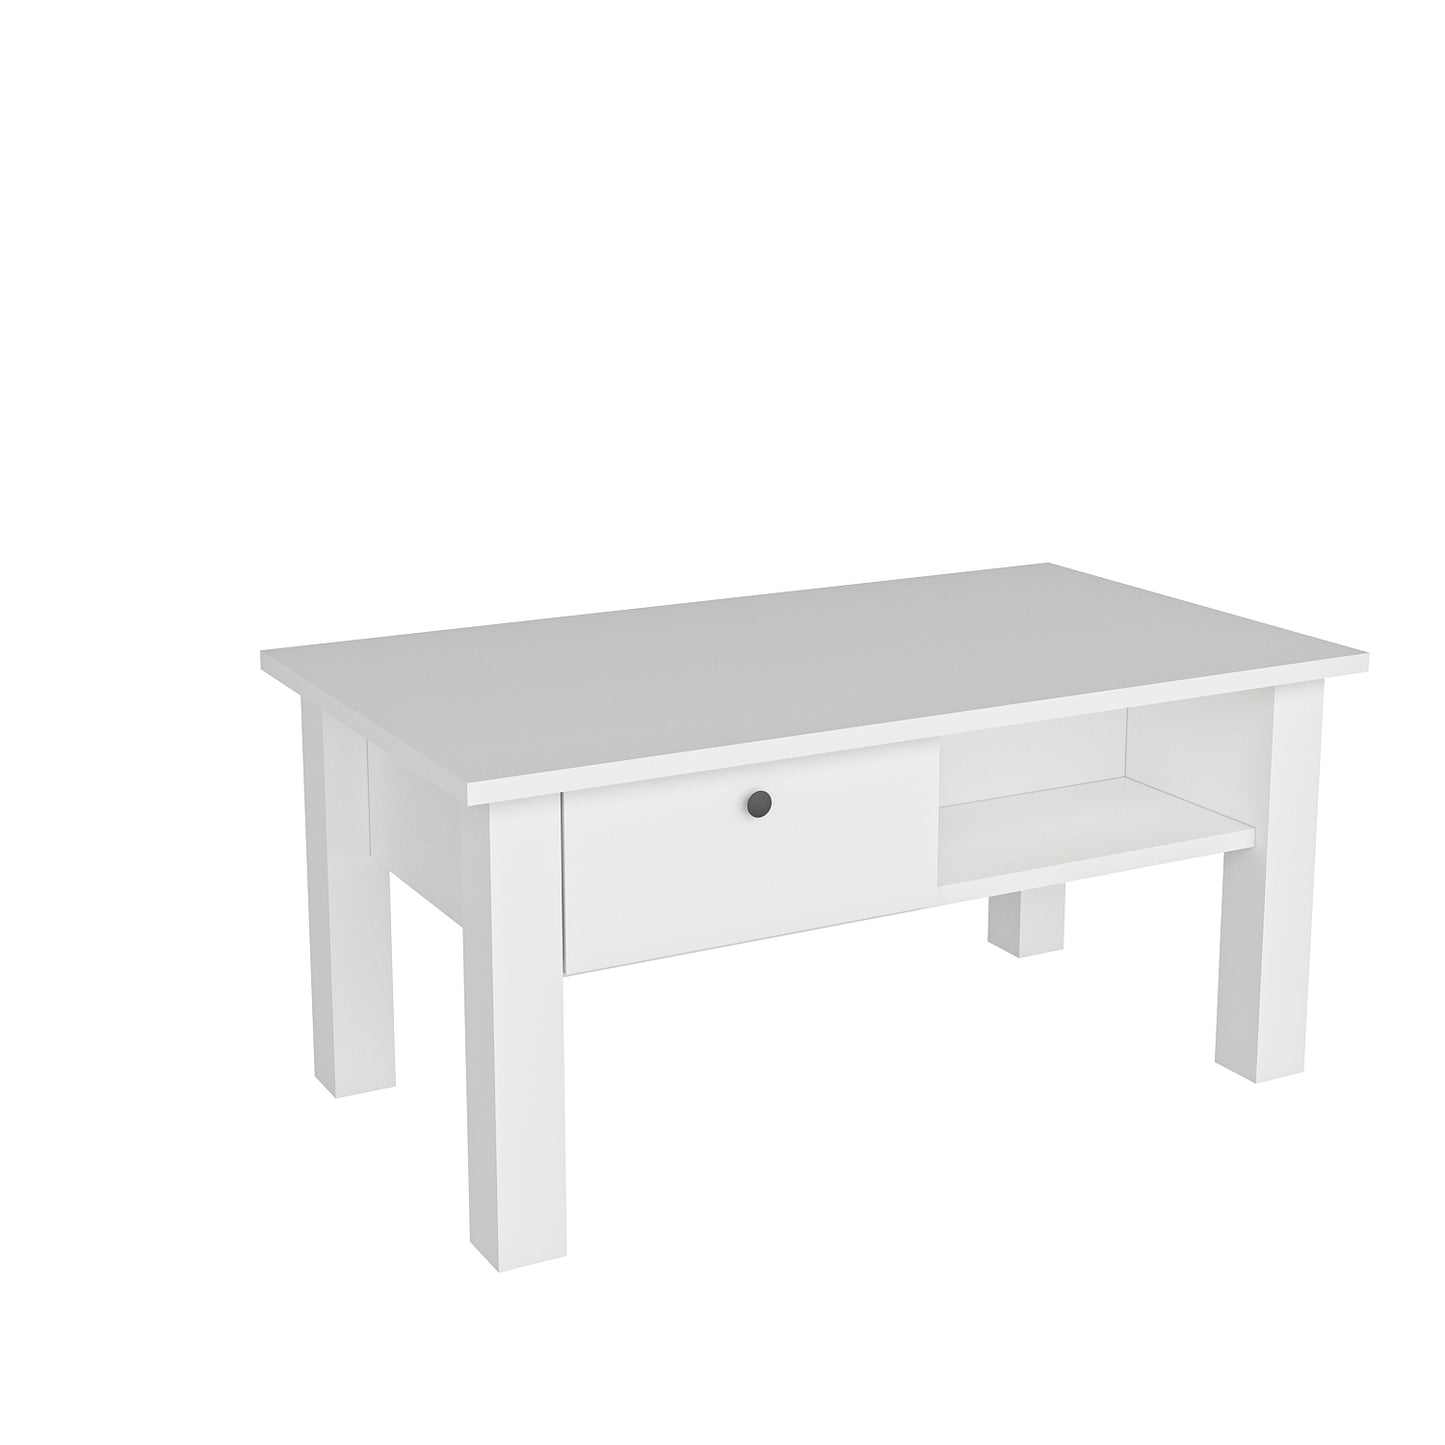 Benito Coffee Table with Drawers